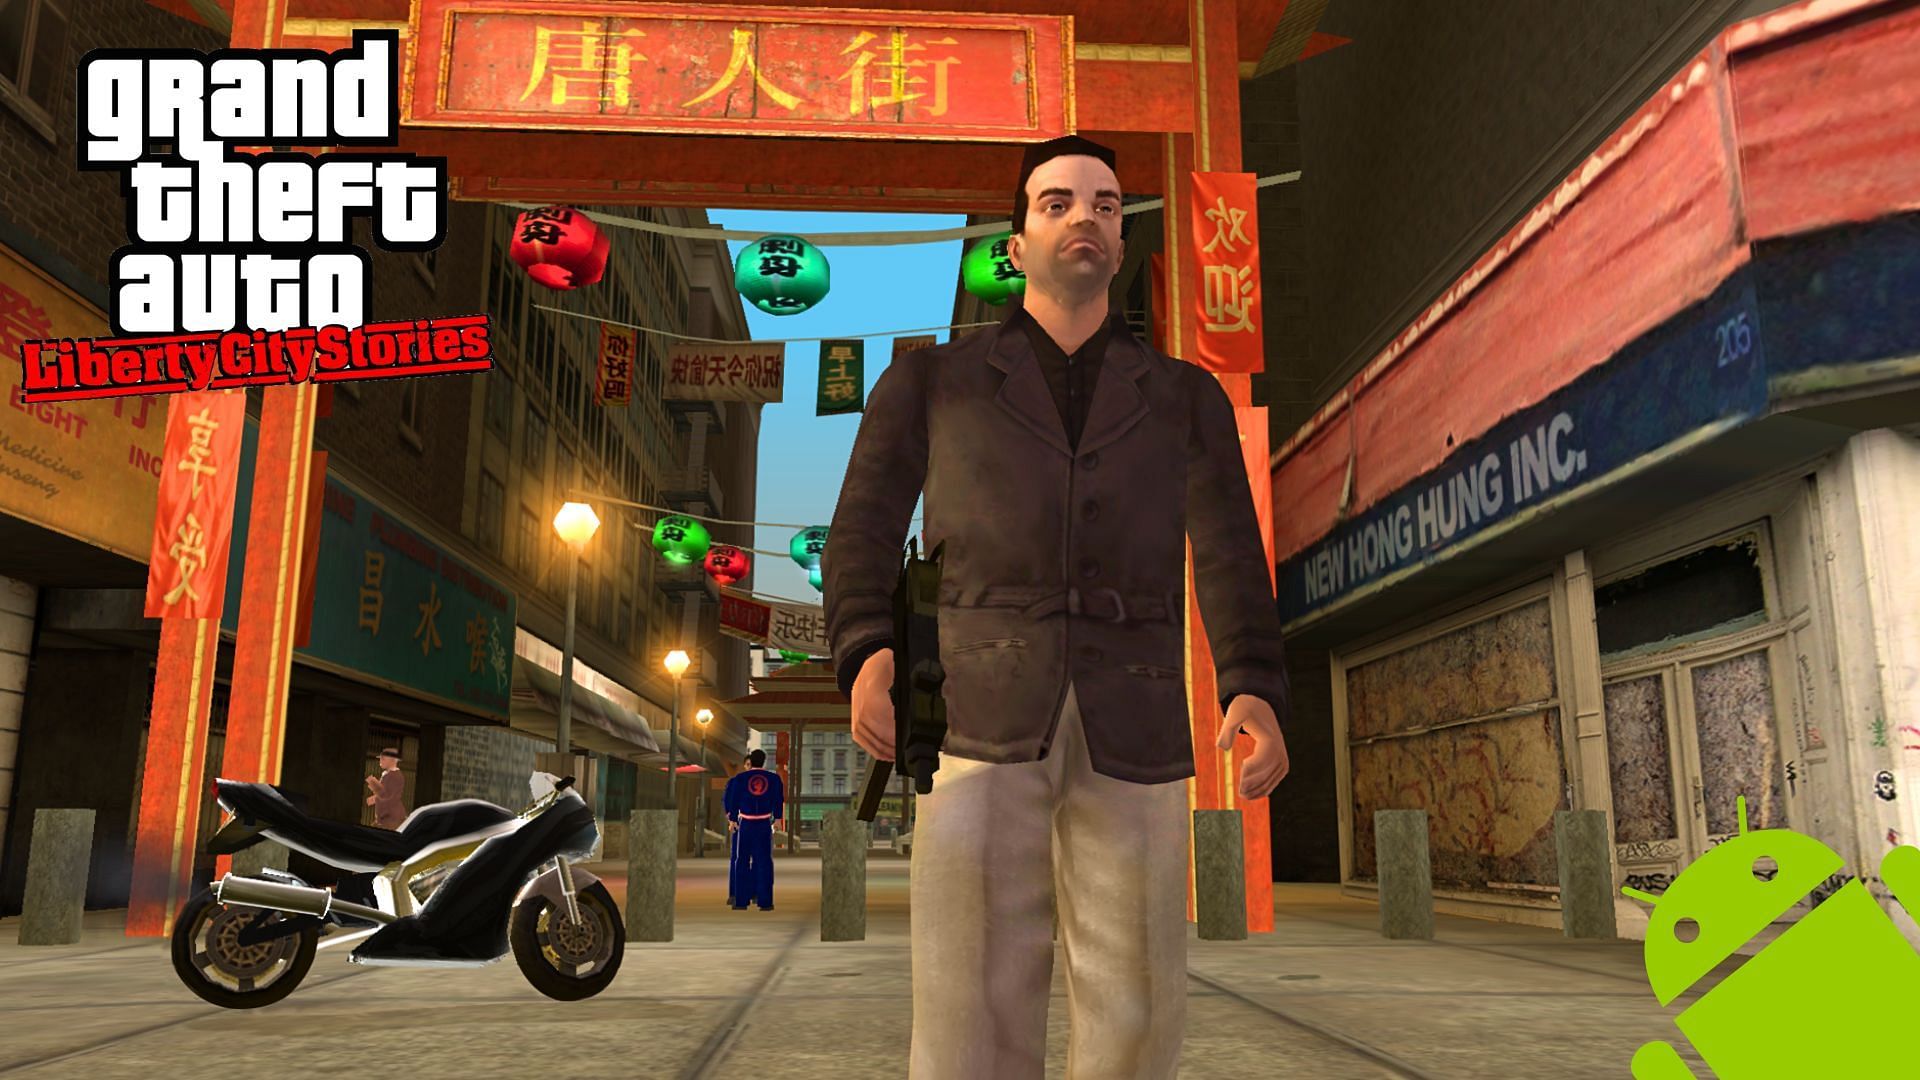 Grand Theft Auto - Vice City Stories APK for Android - Download